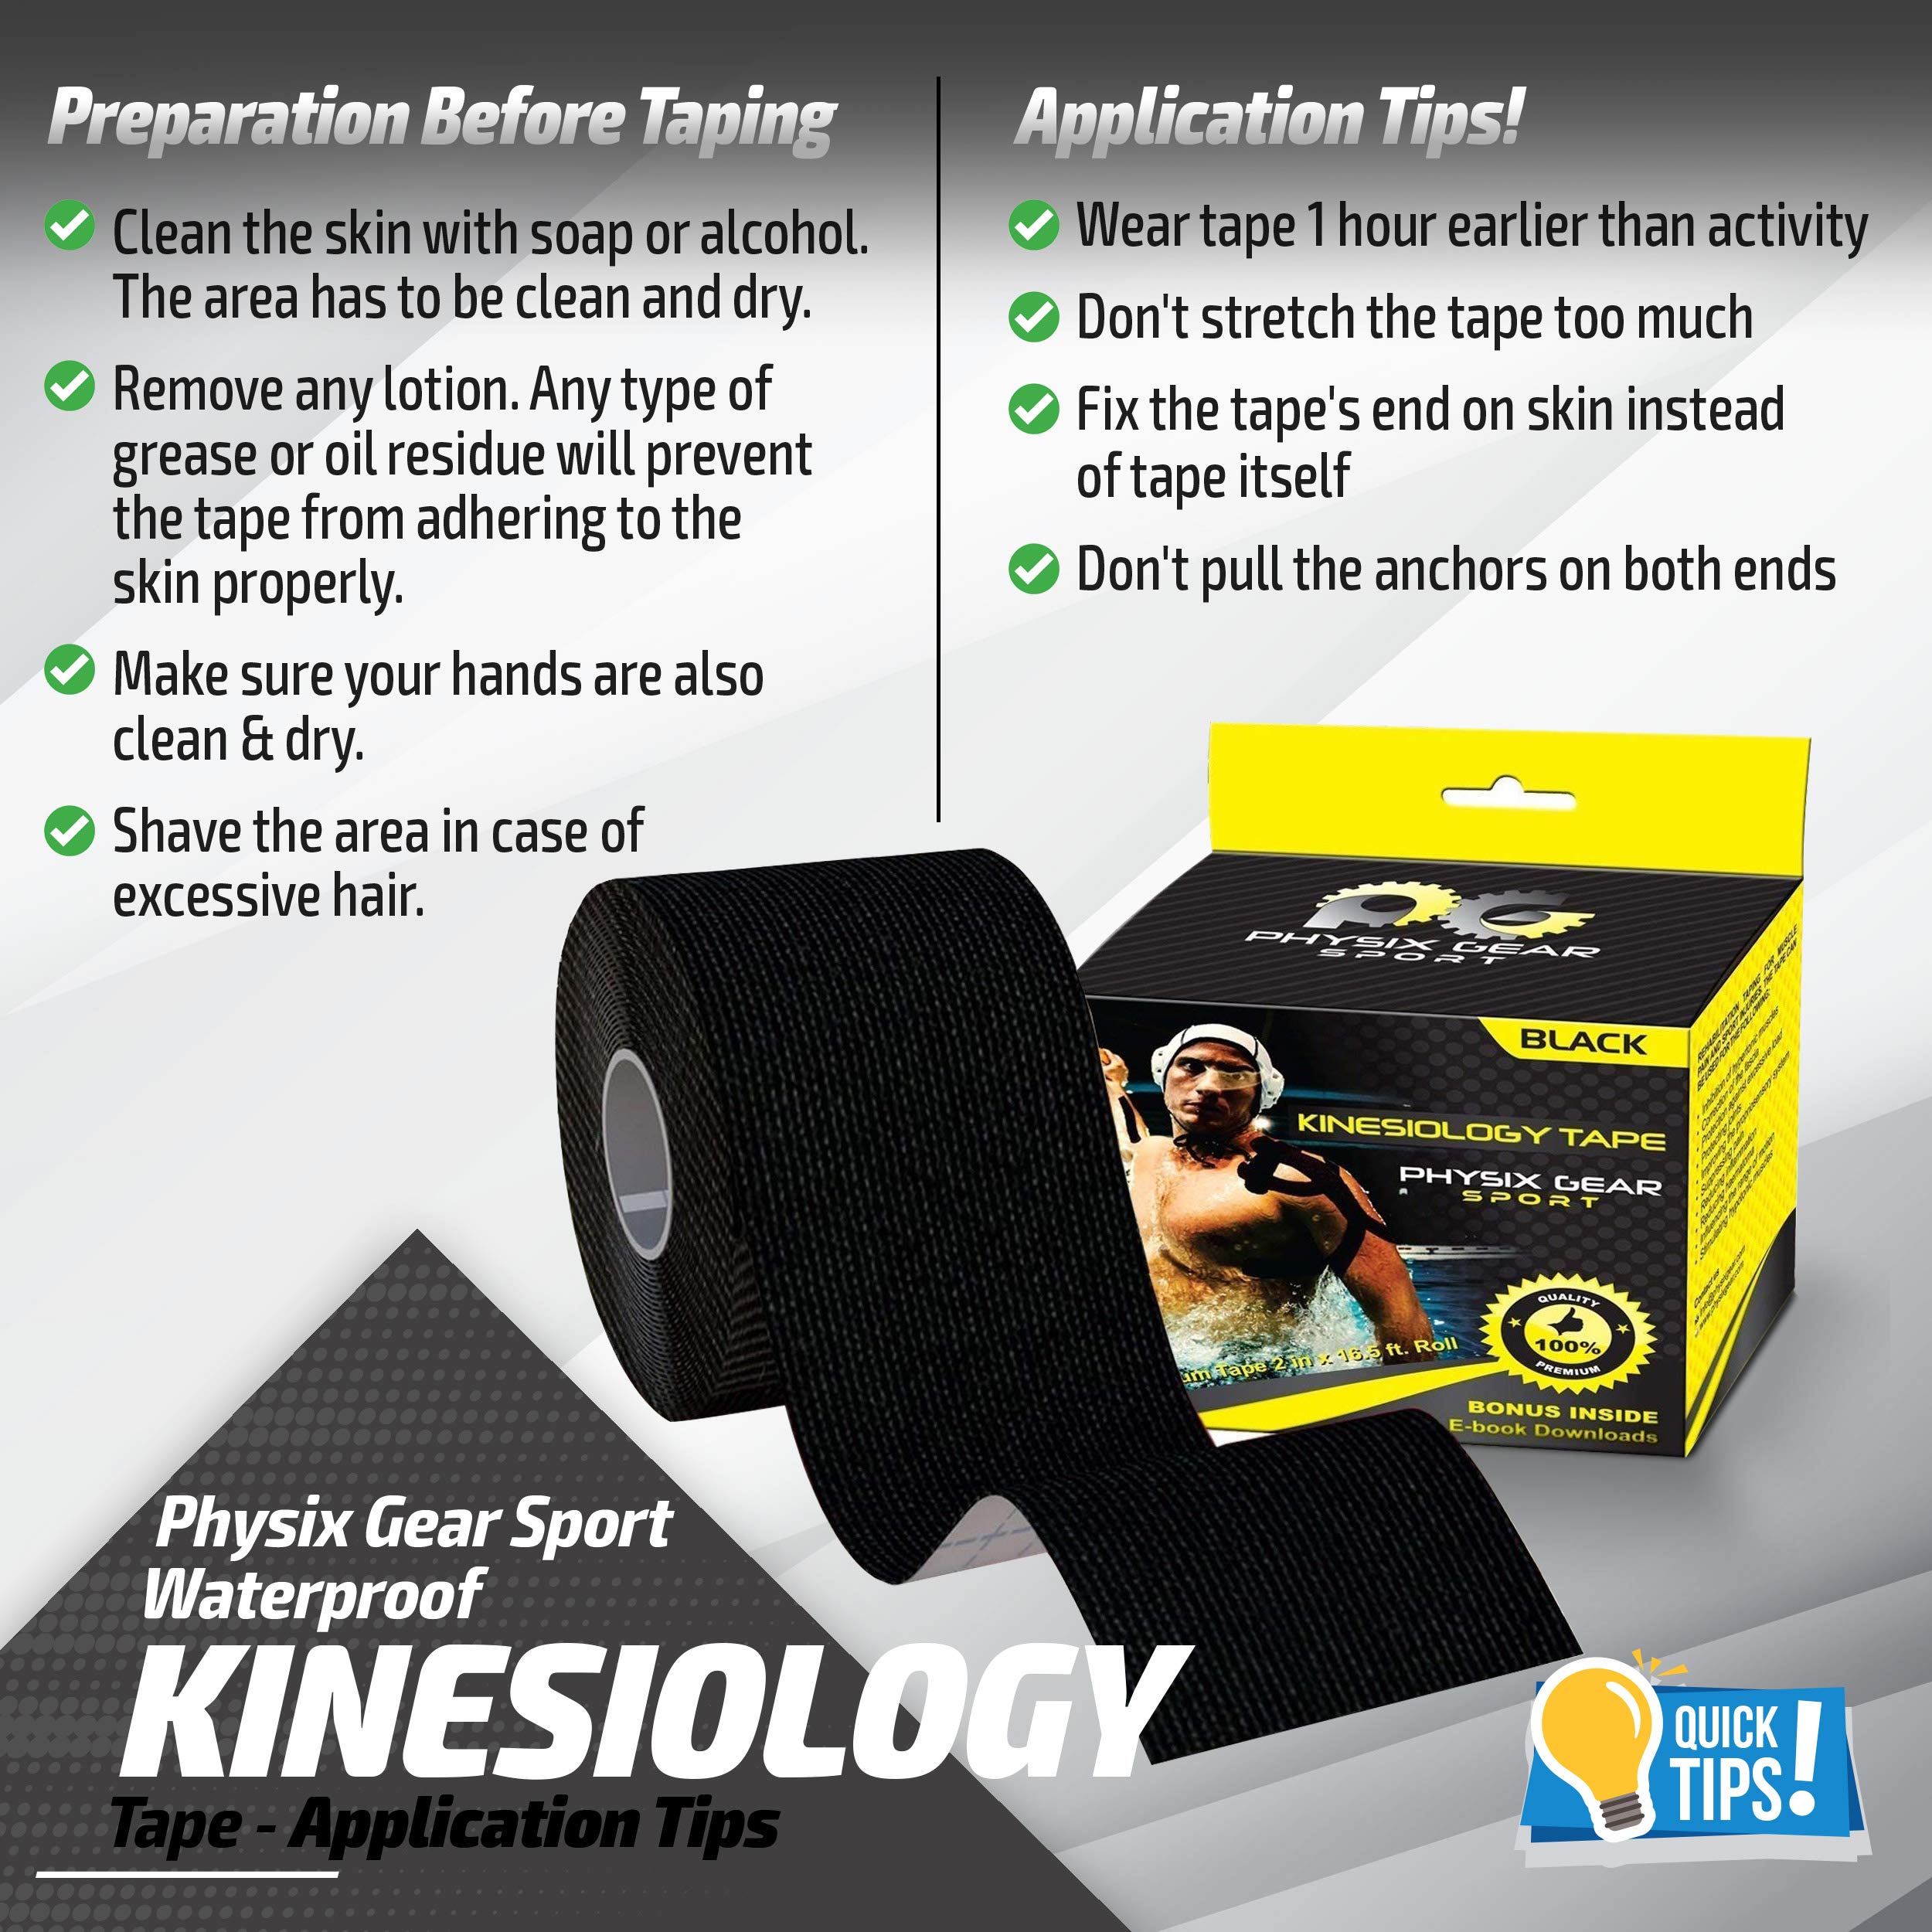 Physix Gear Kinesiology Tape Pro - Waterproof Physio Sports Tape for Pain & Injuries, Pregnancy, Muscle, Knee, Joint Support, Swelling, Strain Relief, Enhanced Blood Circulation (with E-Guide)